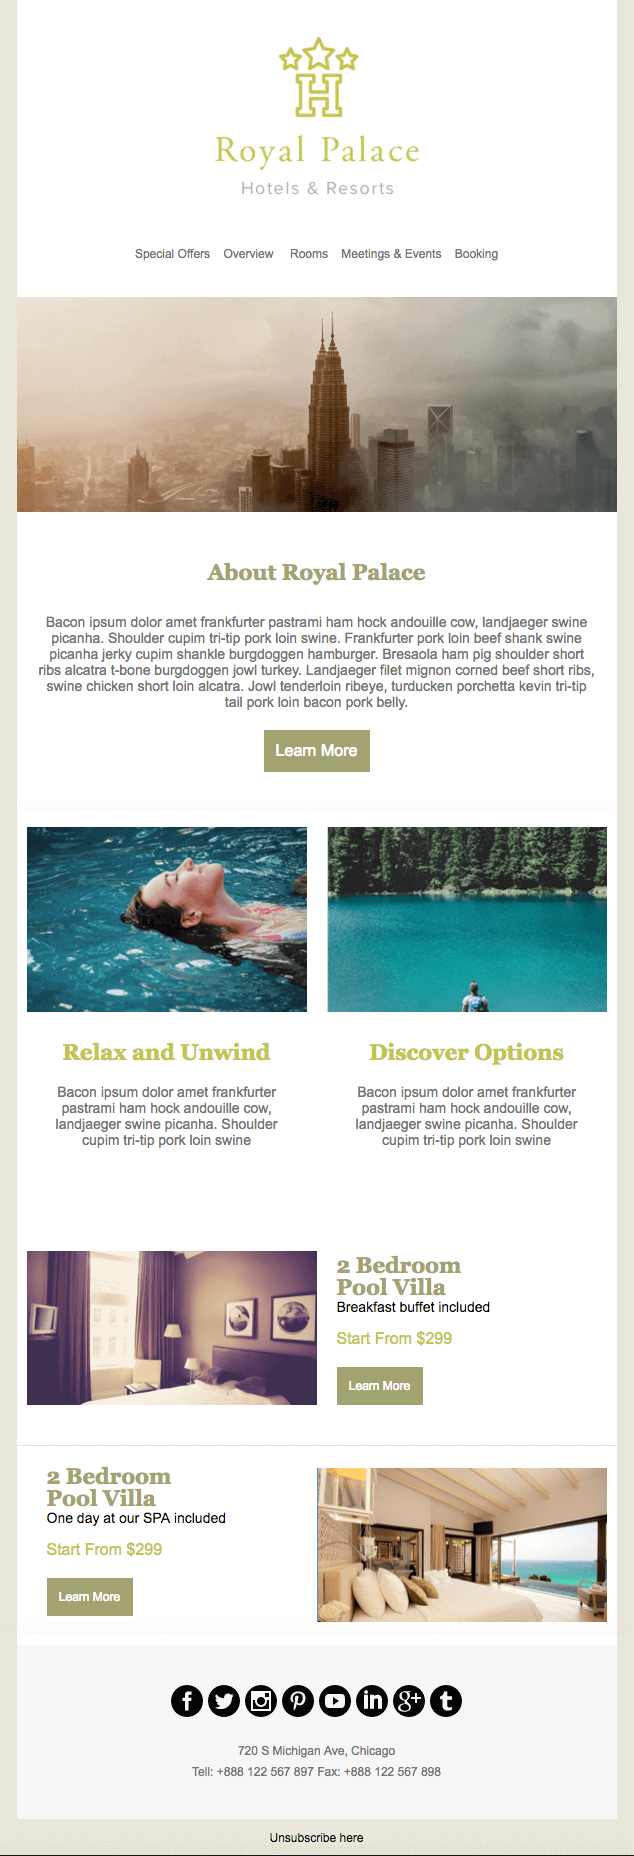 10 Exotic Hospitality And Travel Email Newsletter Templates For Your Visitors 23